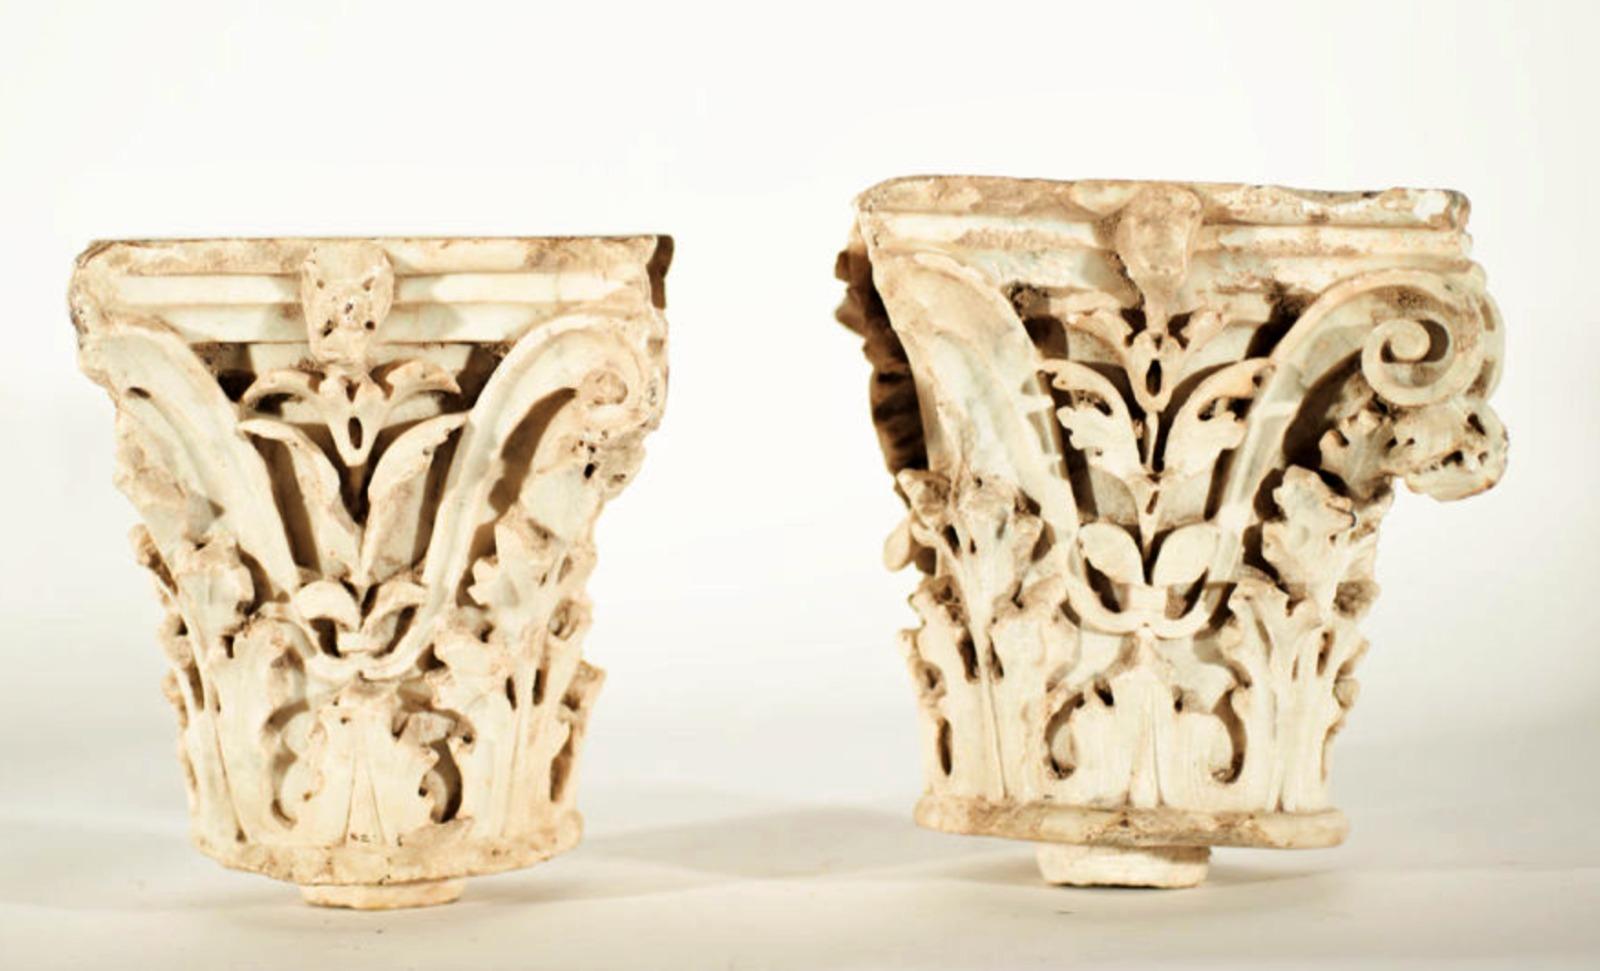 Pair of important capitals in white marble in the Corinthian style, Catholic Monarchs period,
15th century
In white marble.
Provenance: important private collection.
Measurements: 21 x 20 x 20 cm
Good conditions.